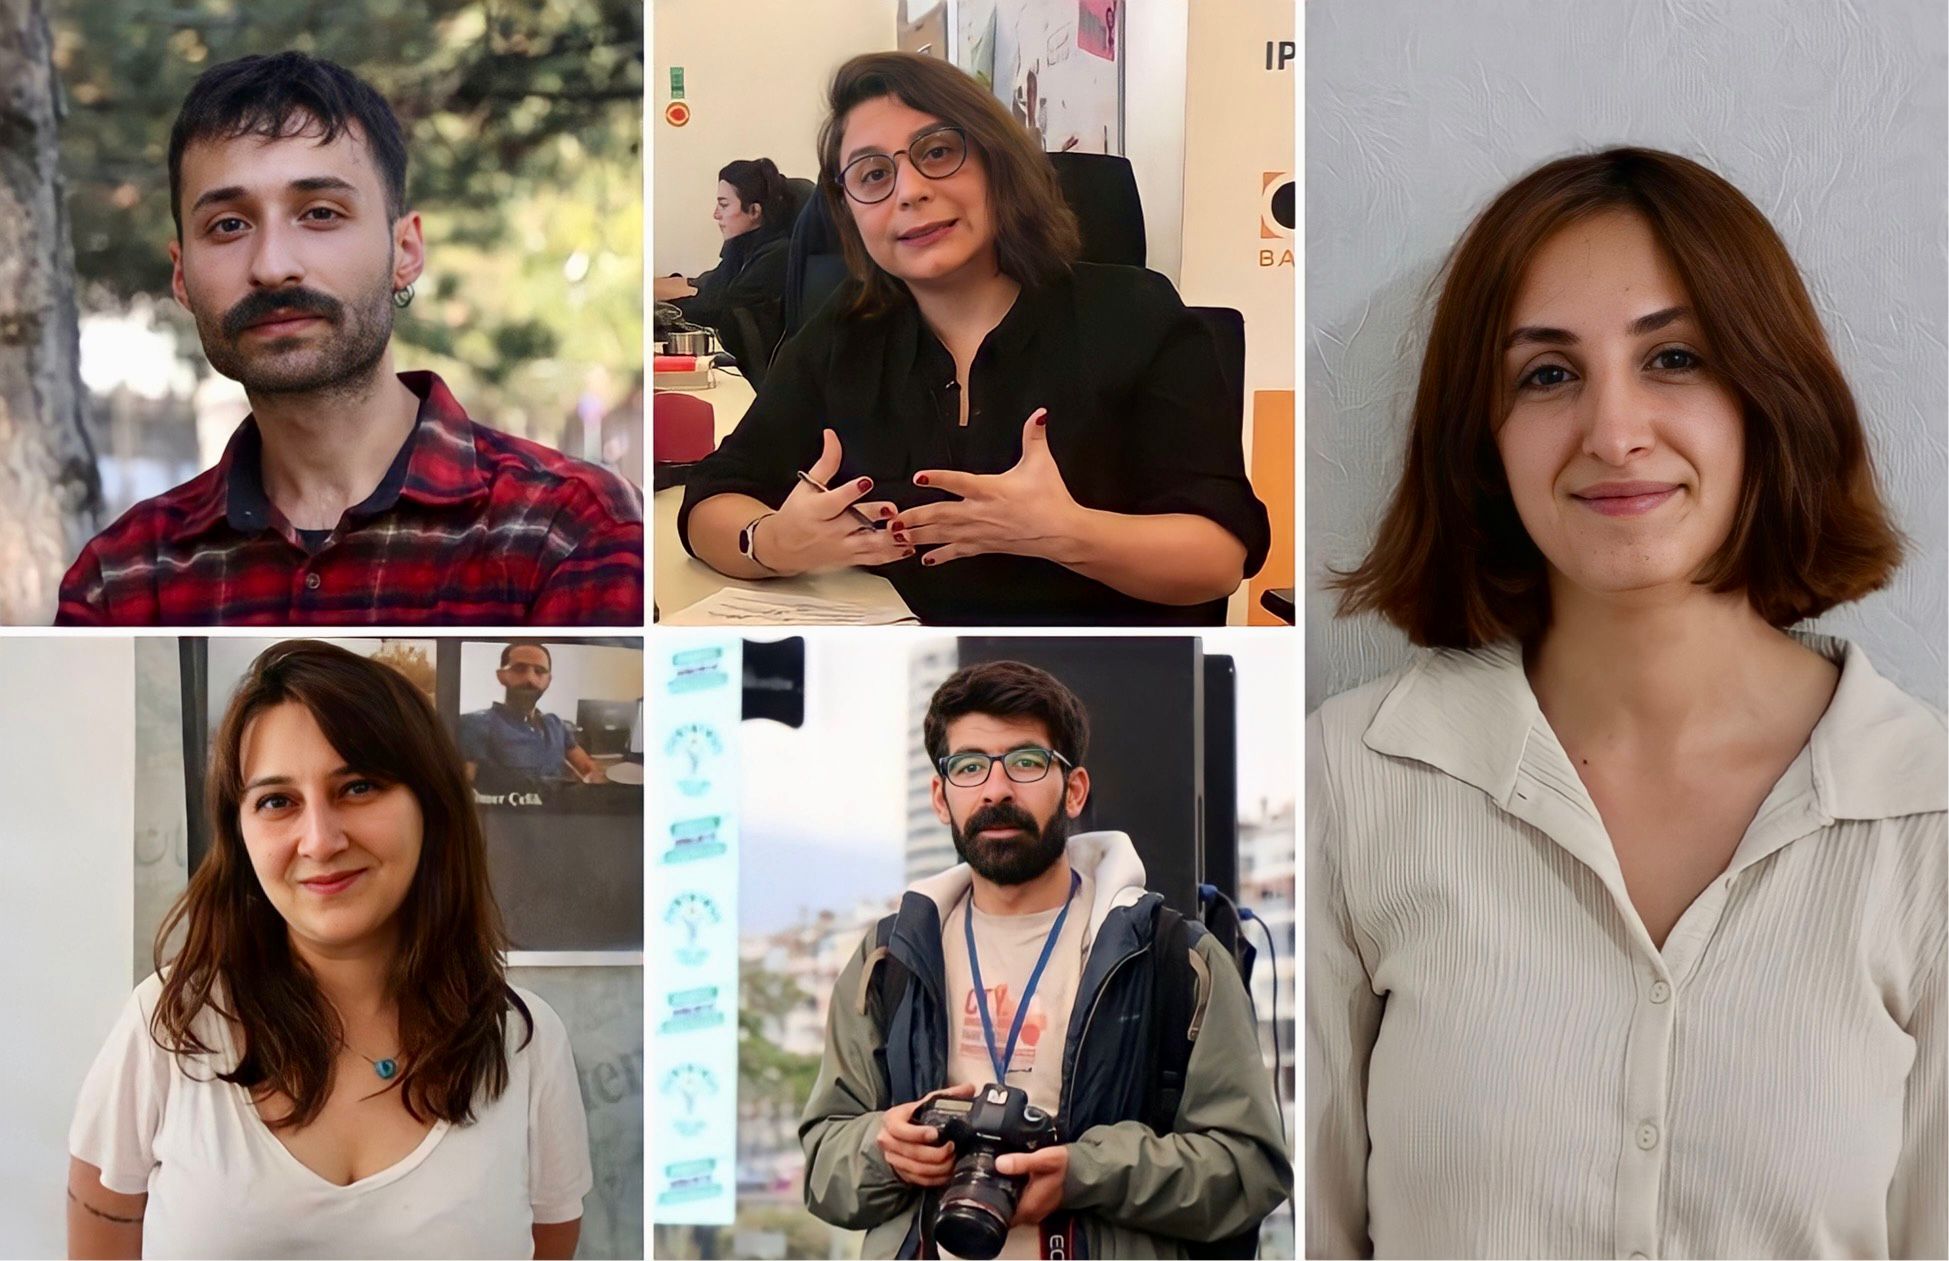 Five journalists, including bianet editor, detained over 'retweets,' lawyer reveals